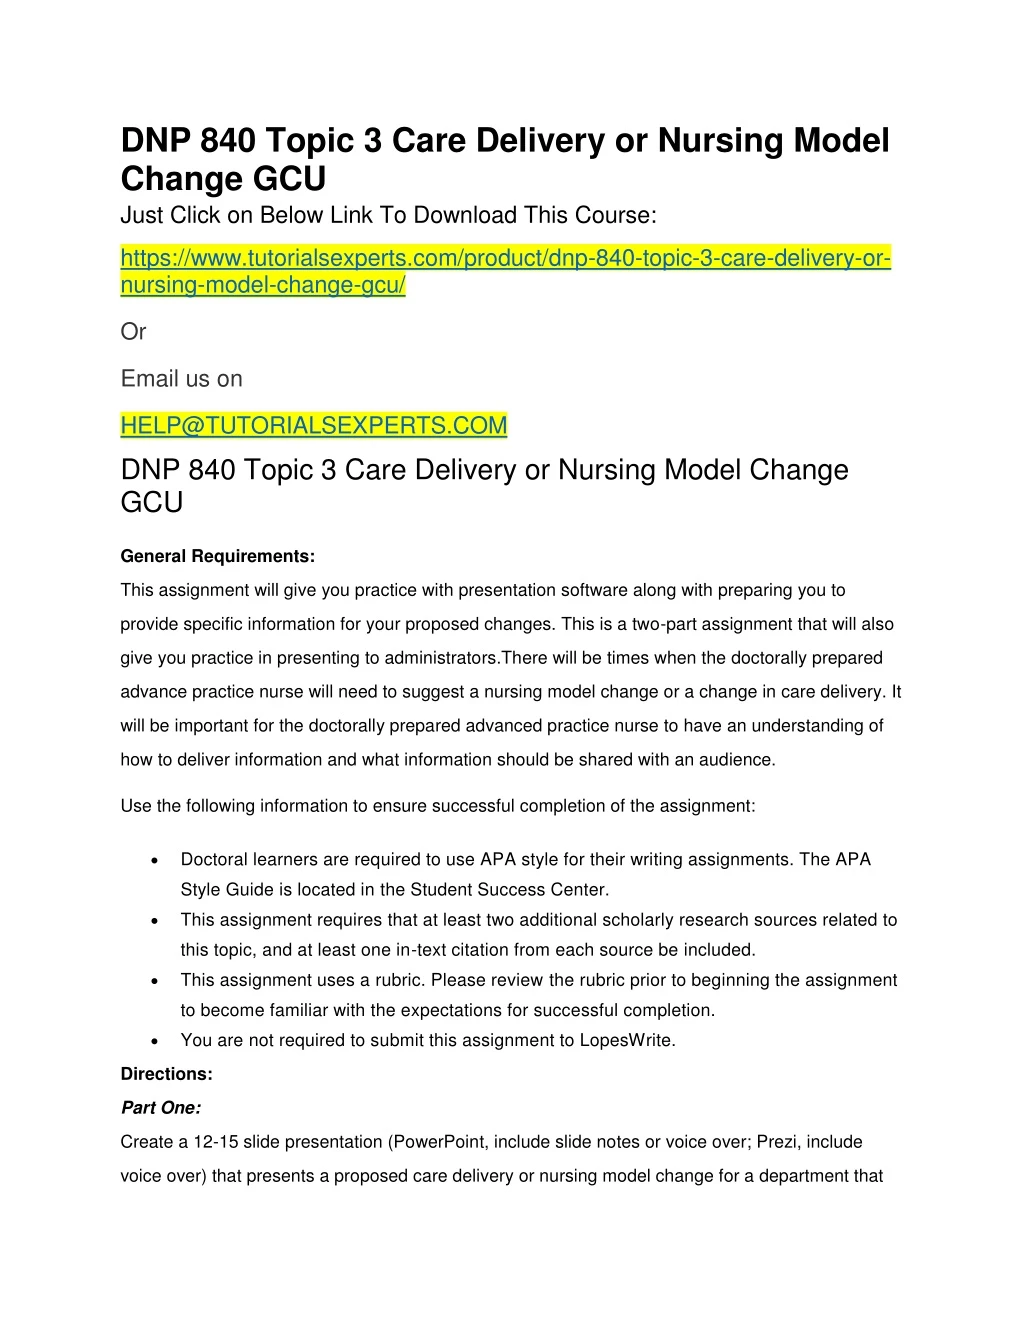 dnp 840 topic 3 care delivery or nursing model